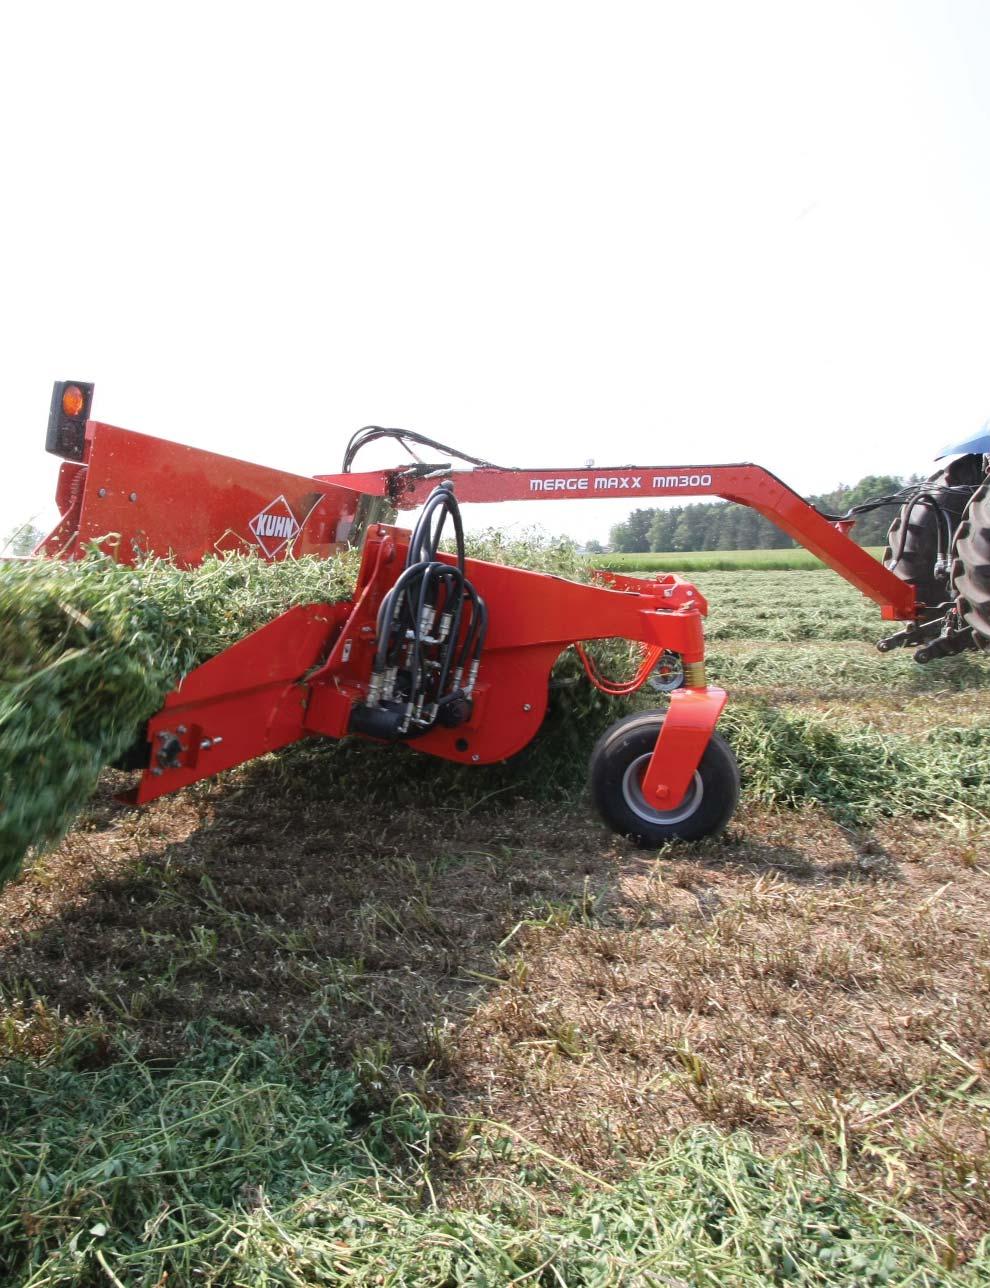 Kuhn mergers produce the fl uffi est, easiest harvesting windrows which are ideal for today's powerful forage harvesters and balers.